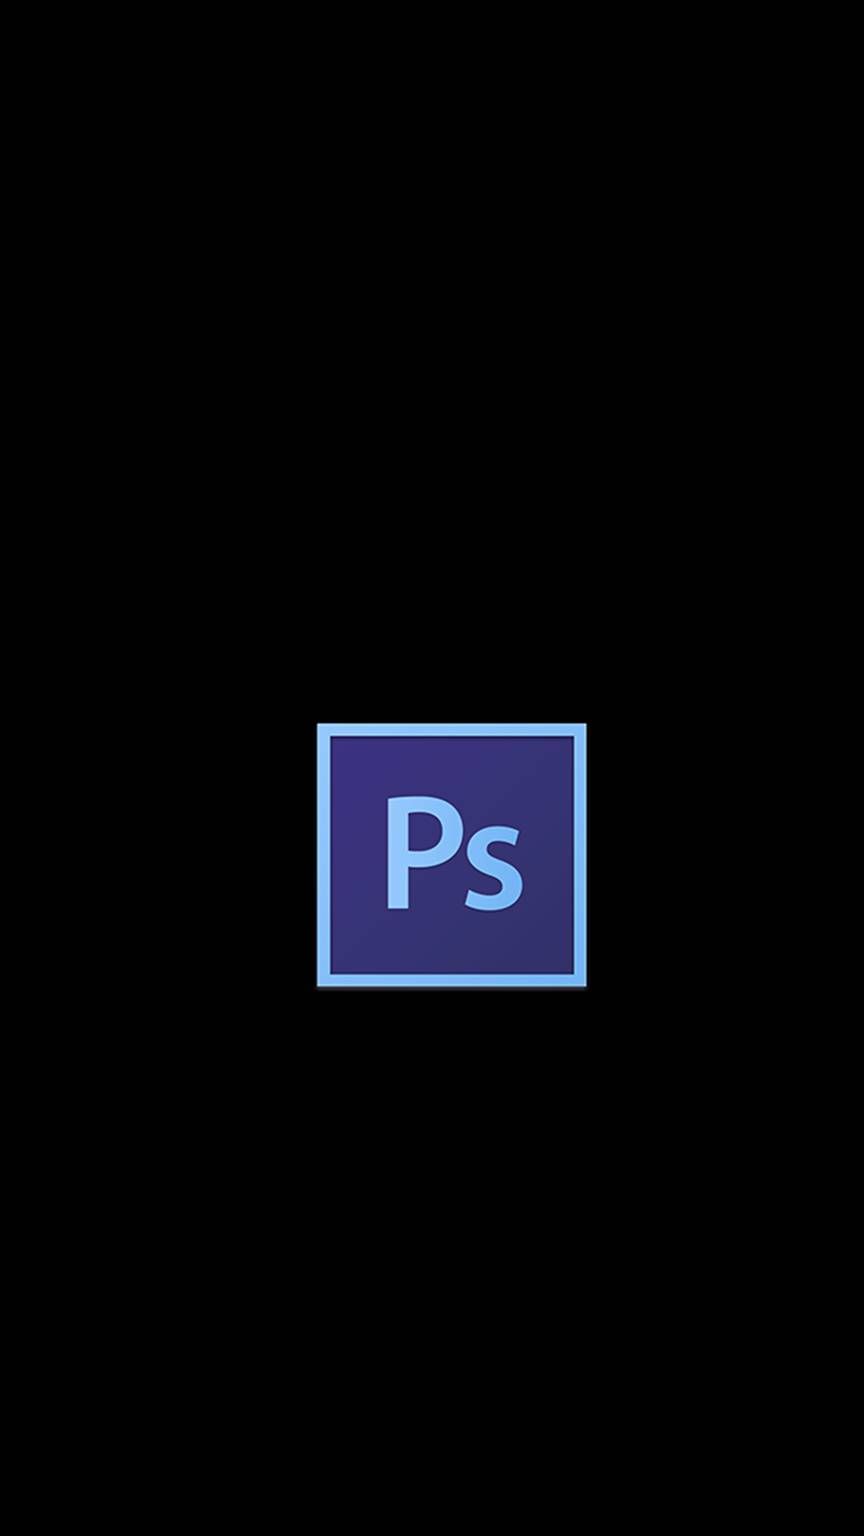 Photoshop Logo Wallpapers - Wallpaper Cave